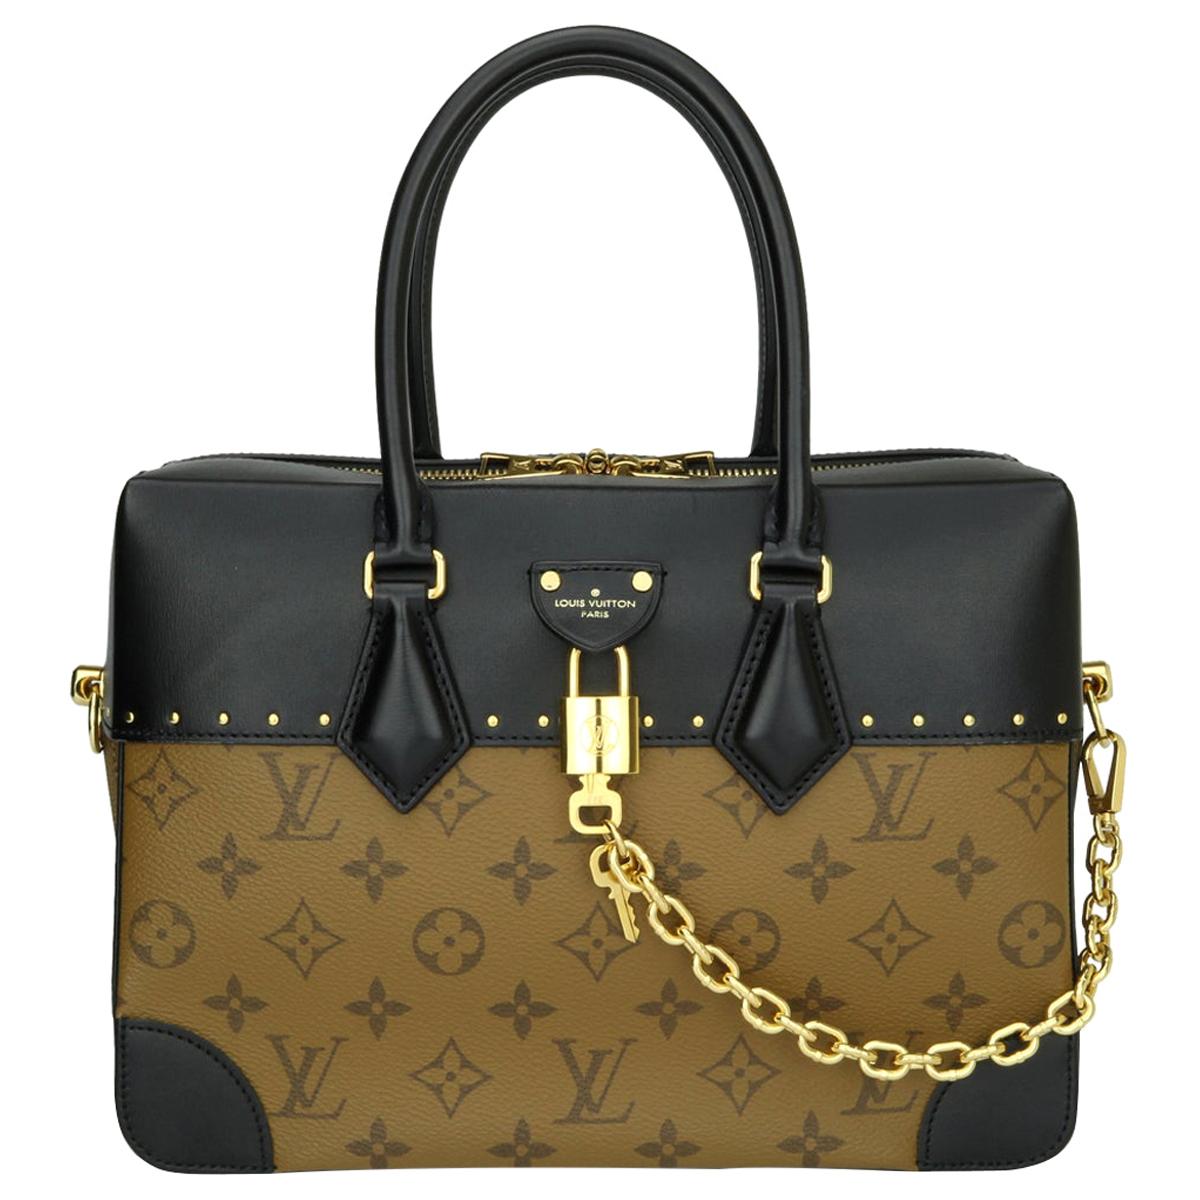 Louis Vuitton City Malle MM Bag Reverse Monogram with Gold Hardware 2018